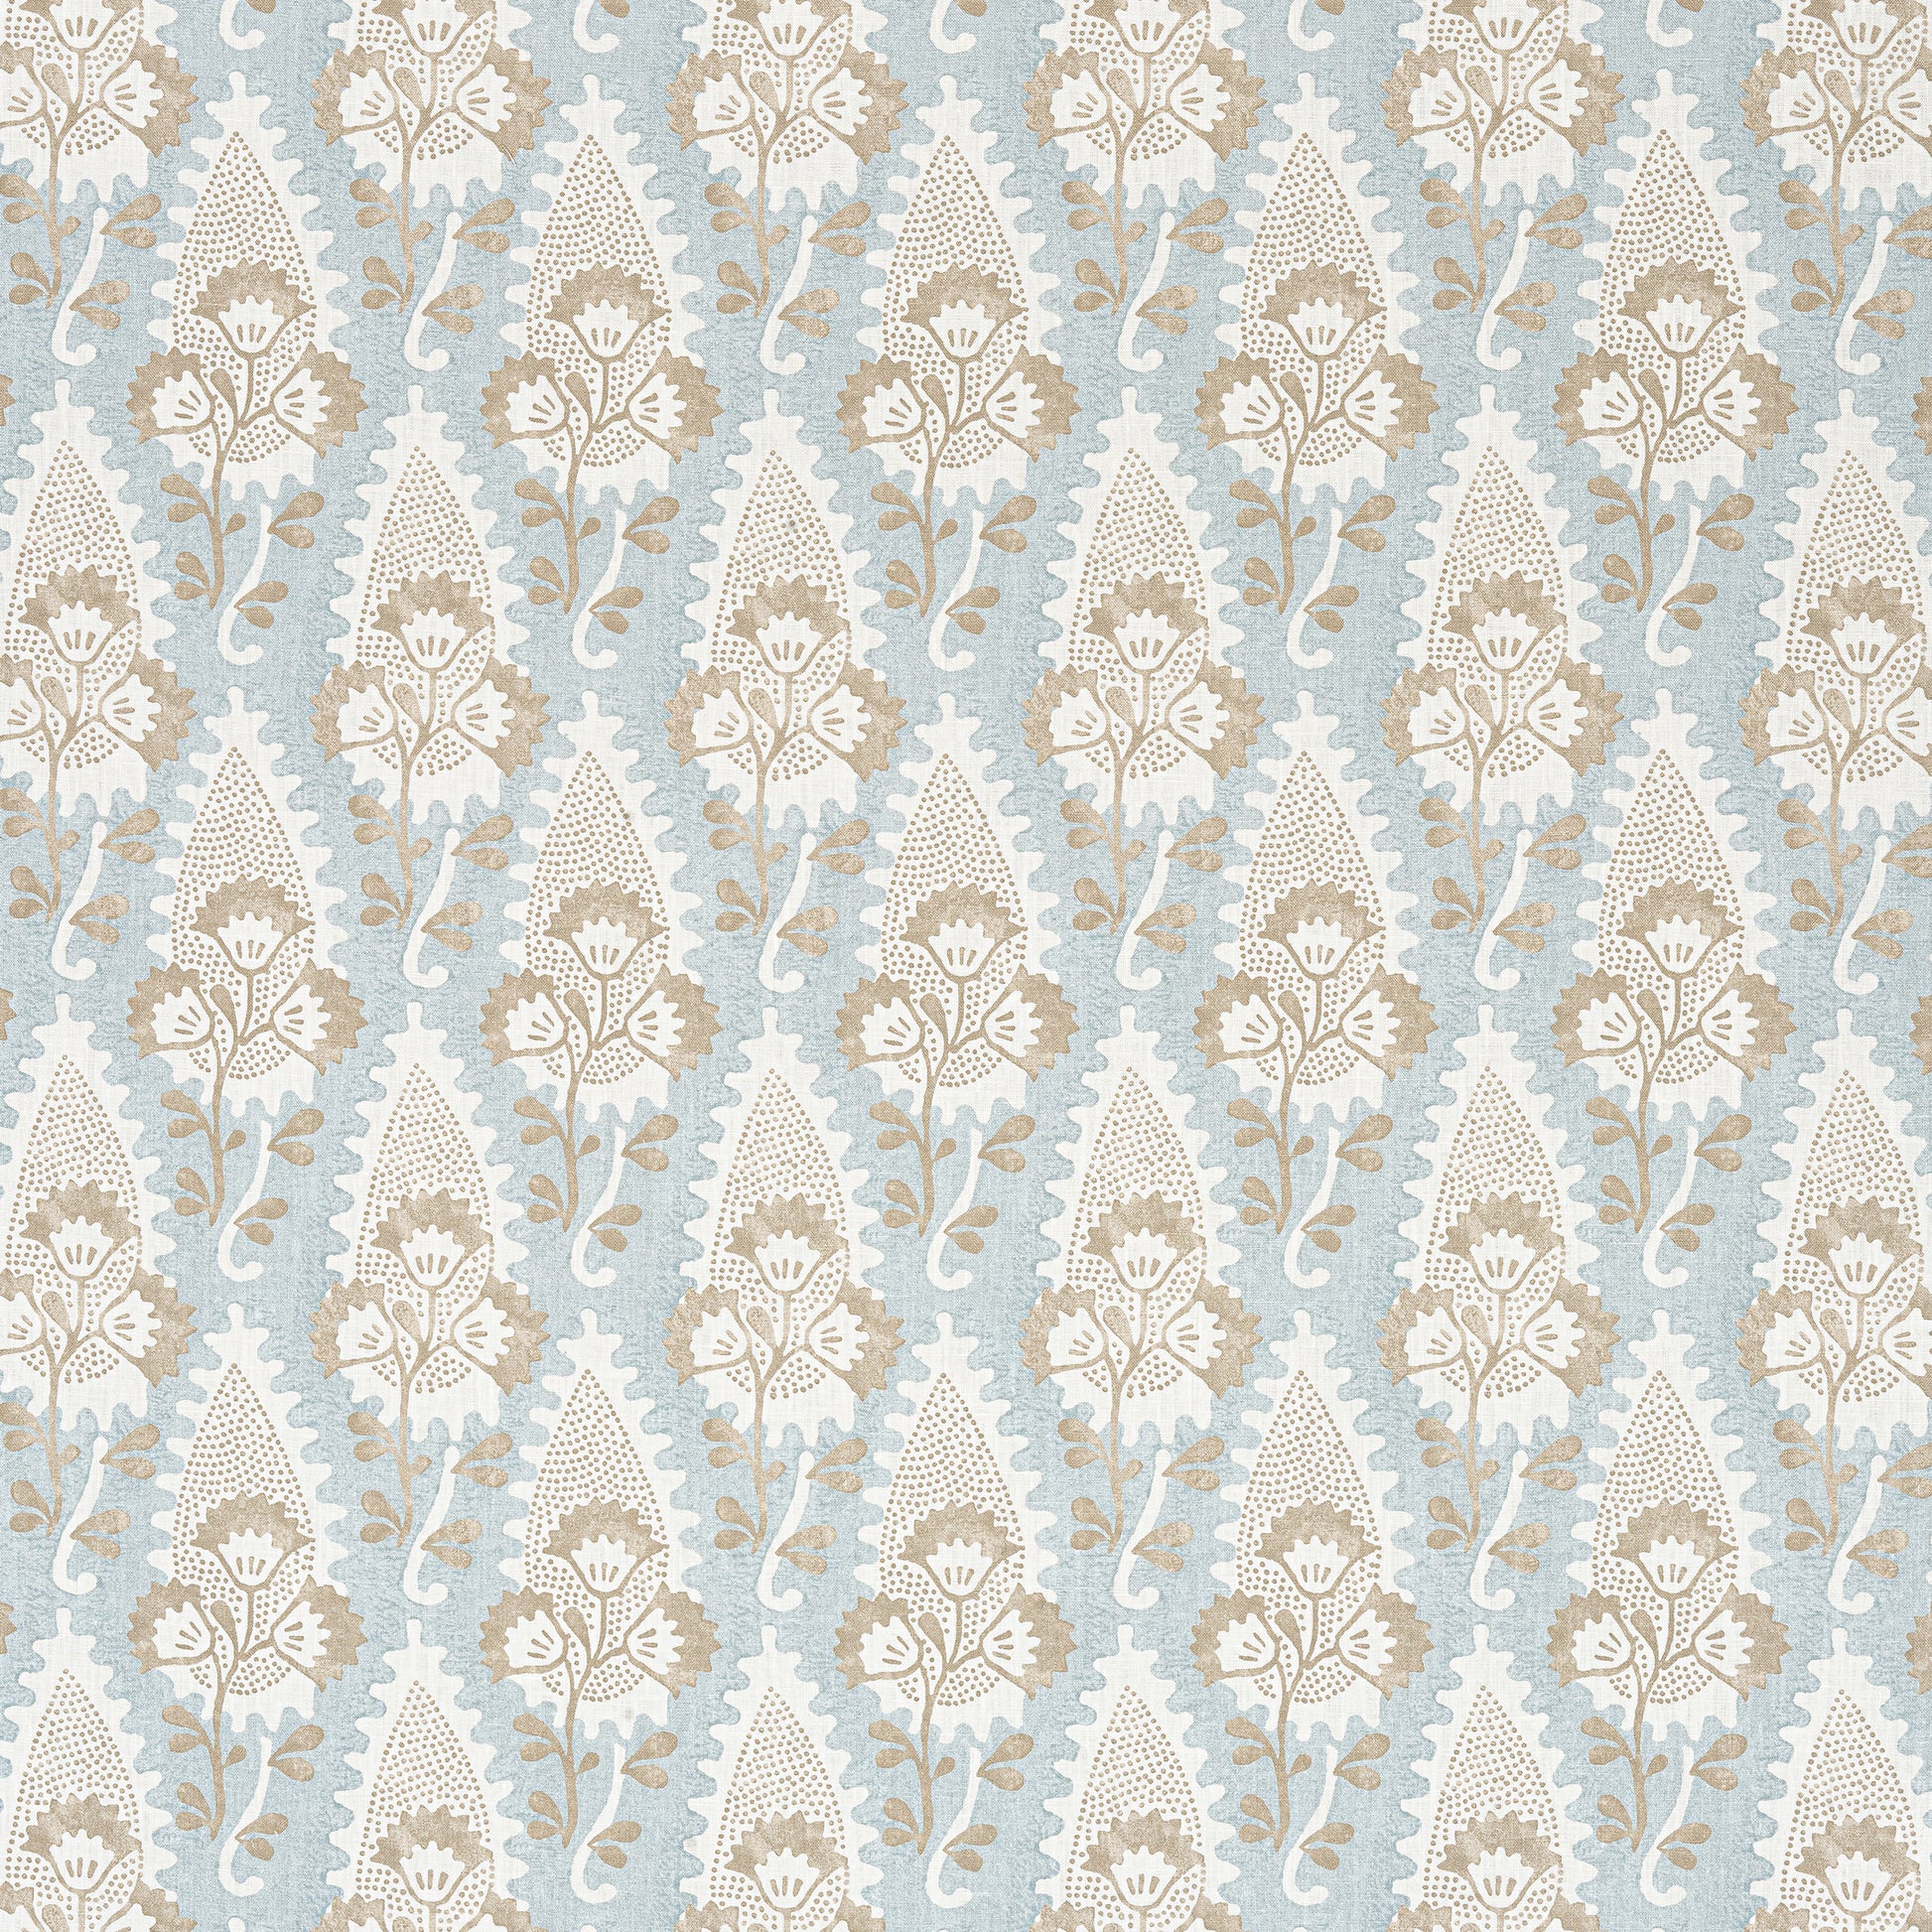 Purchase  Ann French Fabric Product# AF15123  pattern name  Cornwall